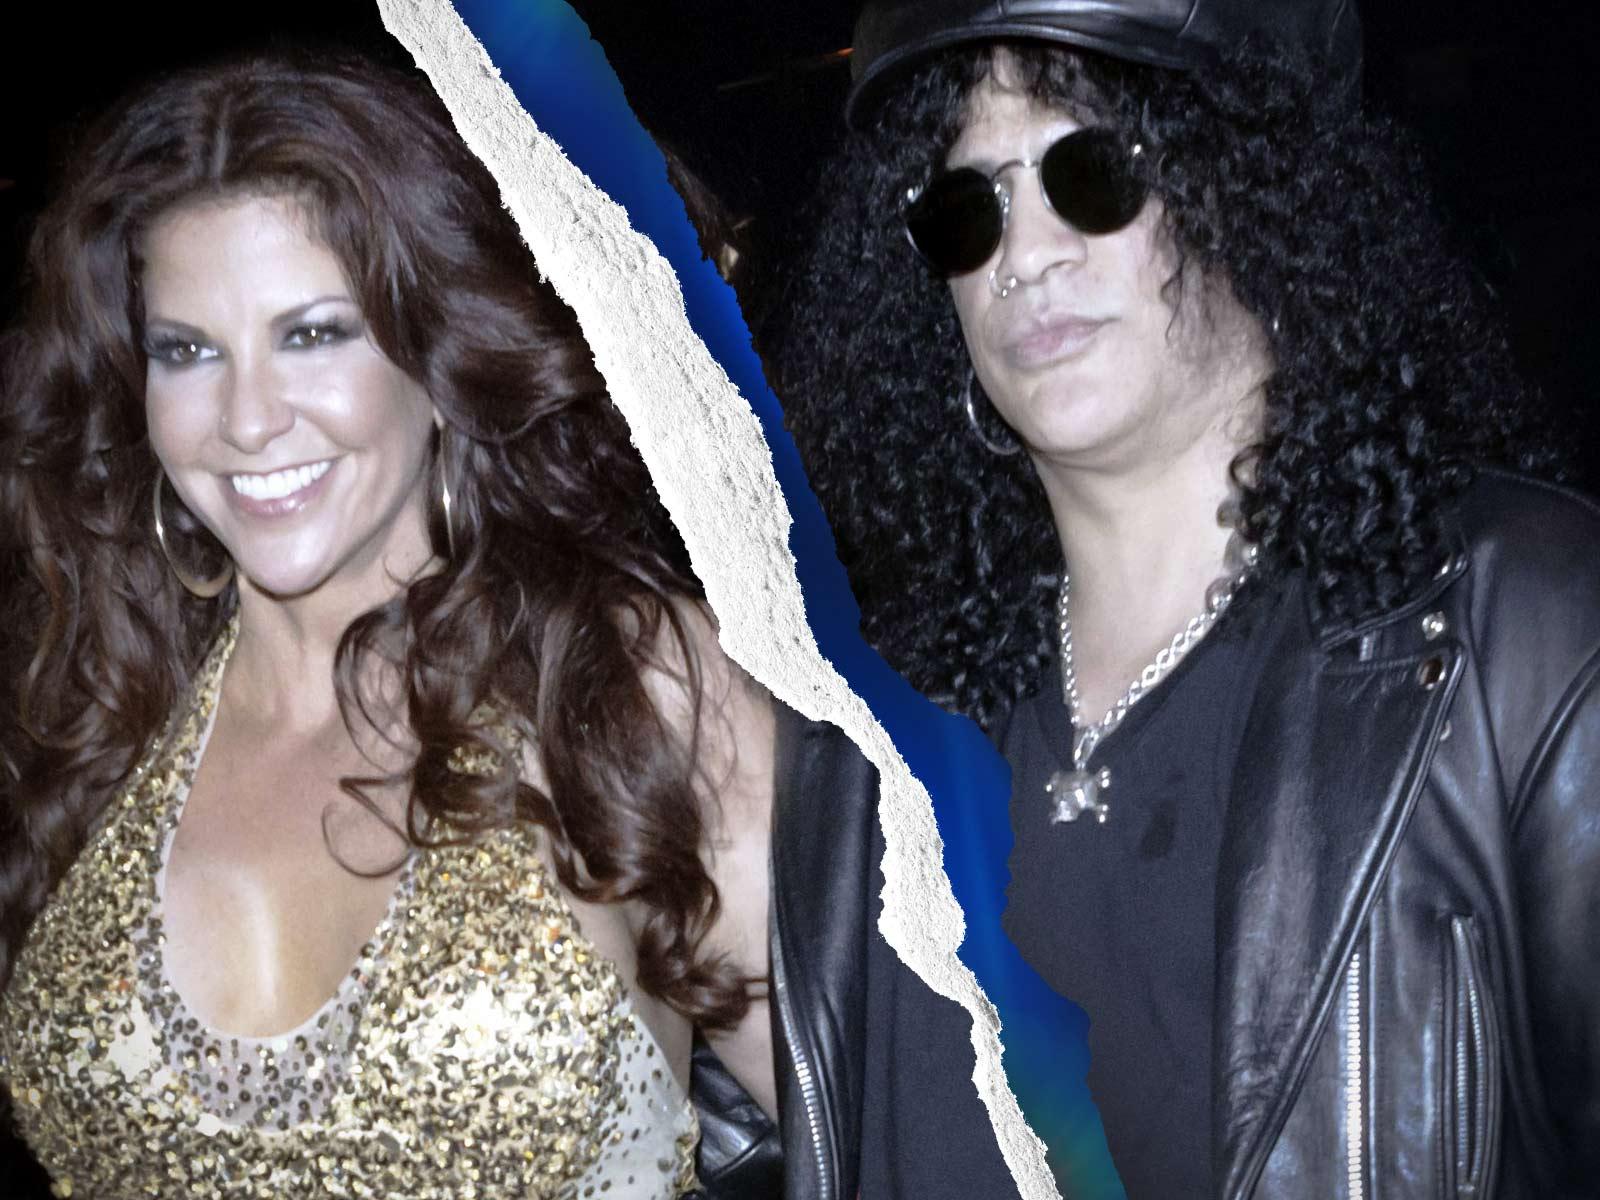 Slash and Wife Score His and Her Mansions During Divorce